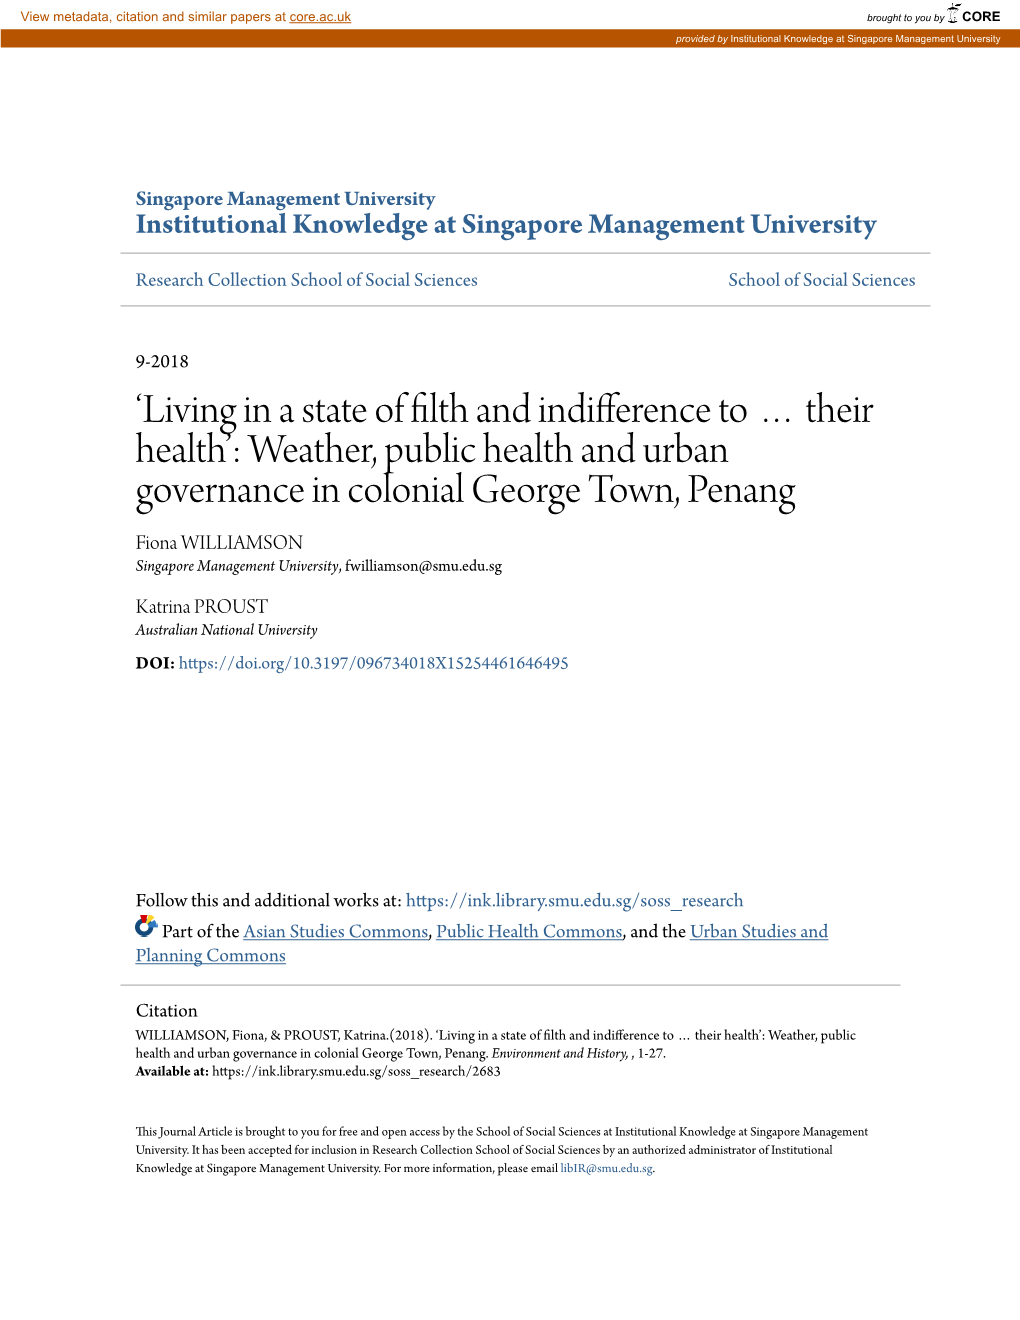 Weather, Public Health and Urban Governance in Colonial George Town, Penang Fiona WILLIAMSON Singapore Management University, Fwilliamson@Smu.Edu.Sg